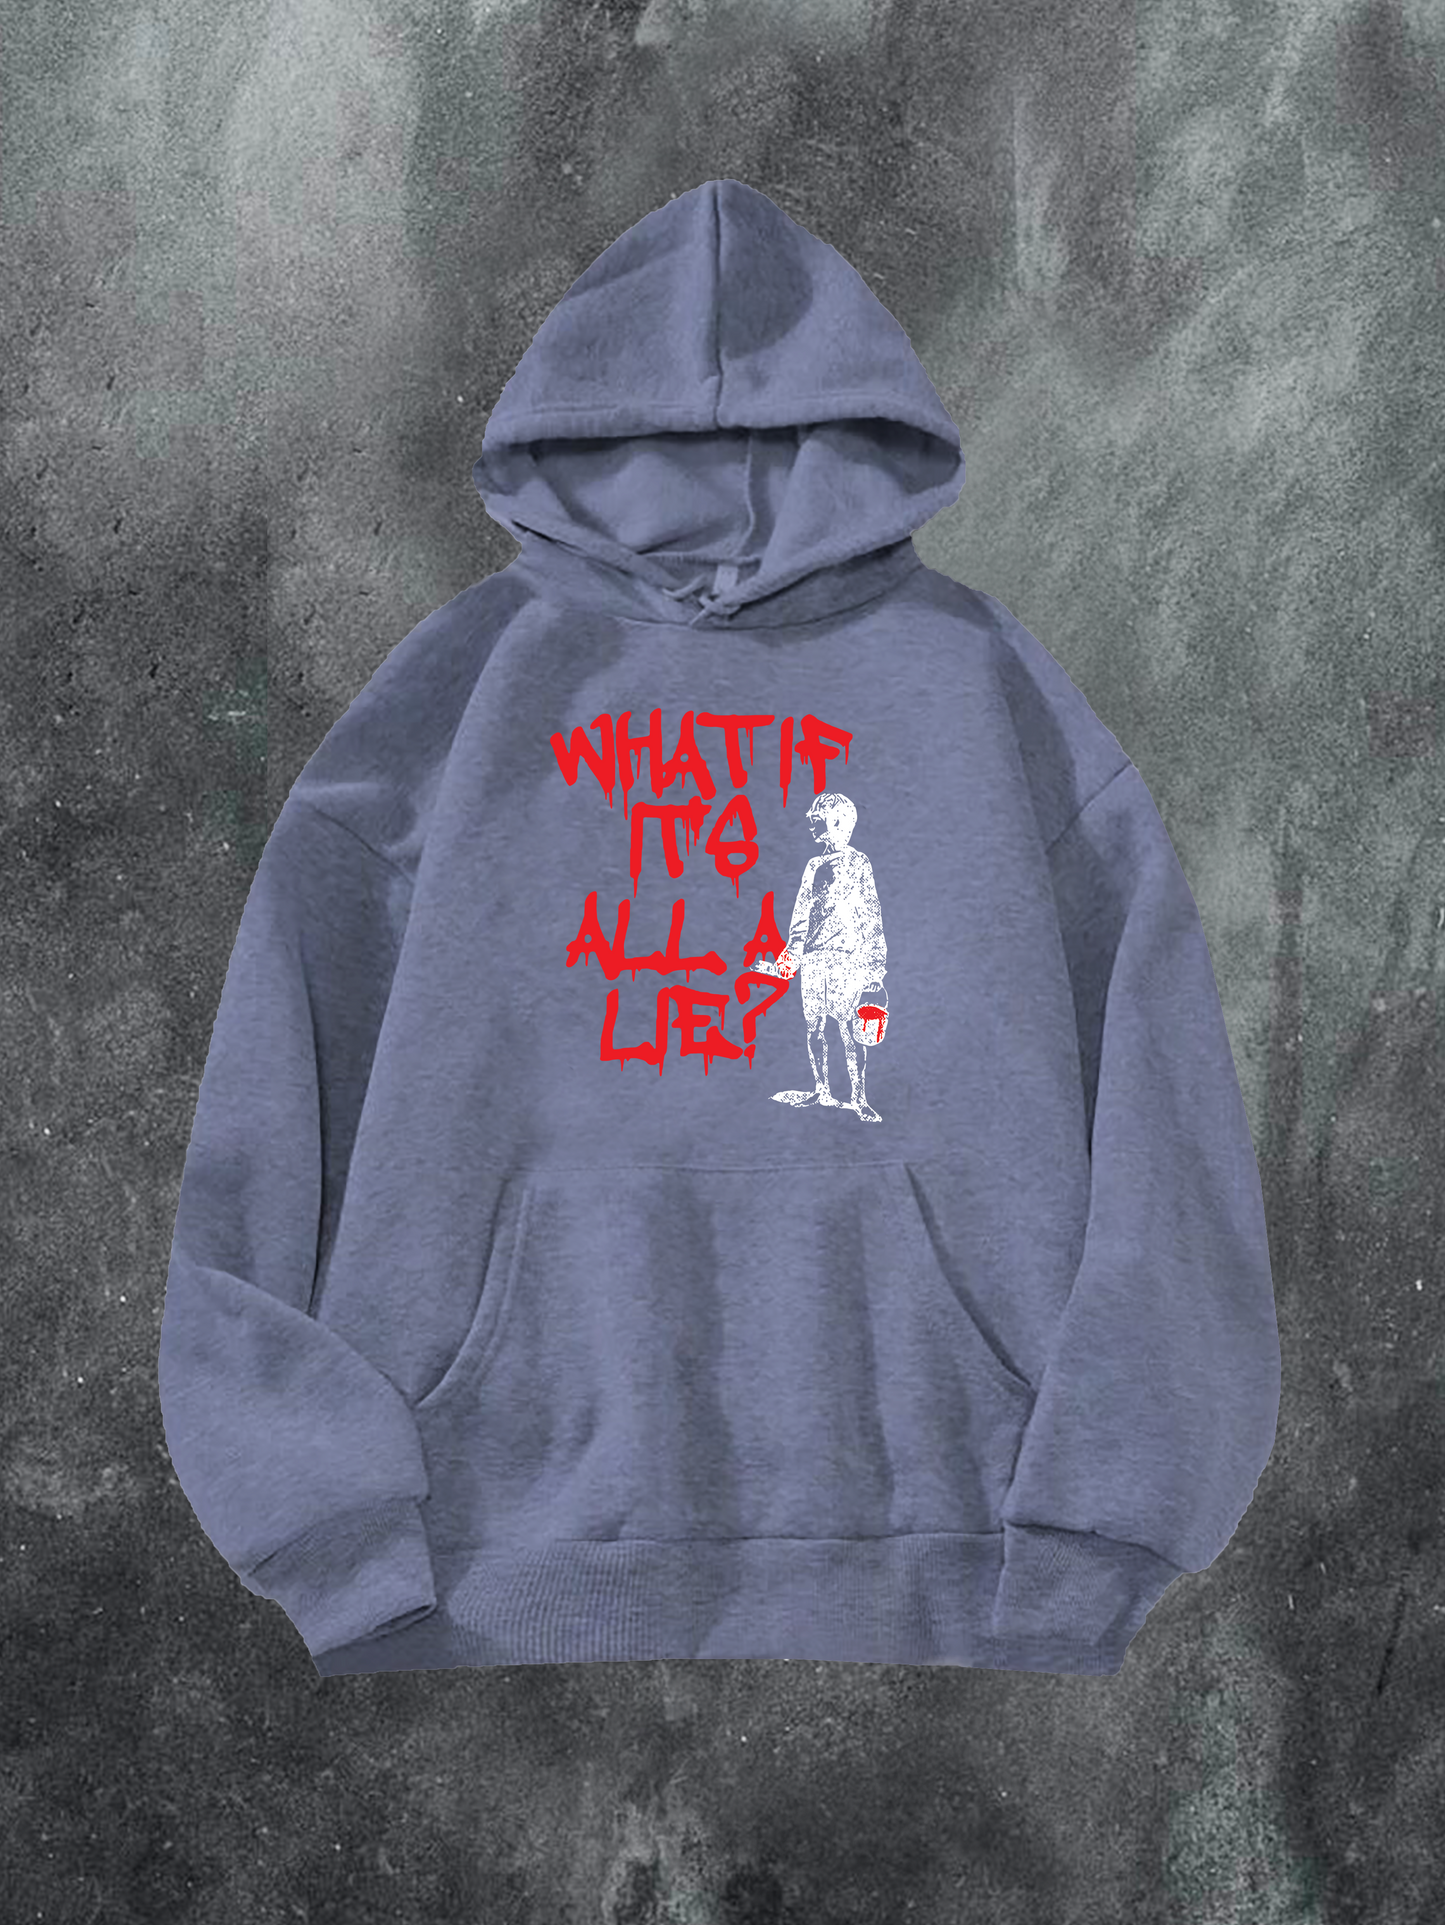 WHAT IF IT'S All A LIE Hoodie